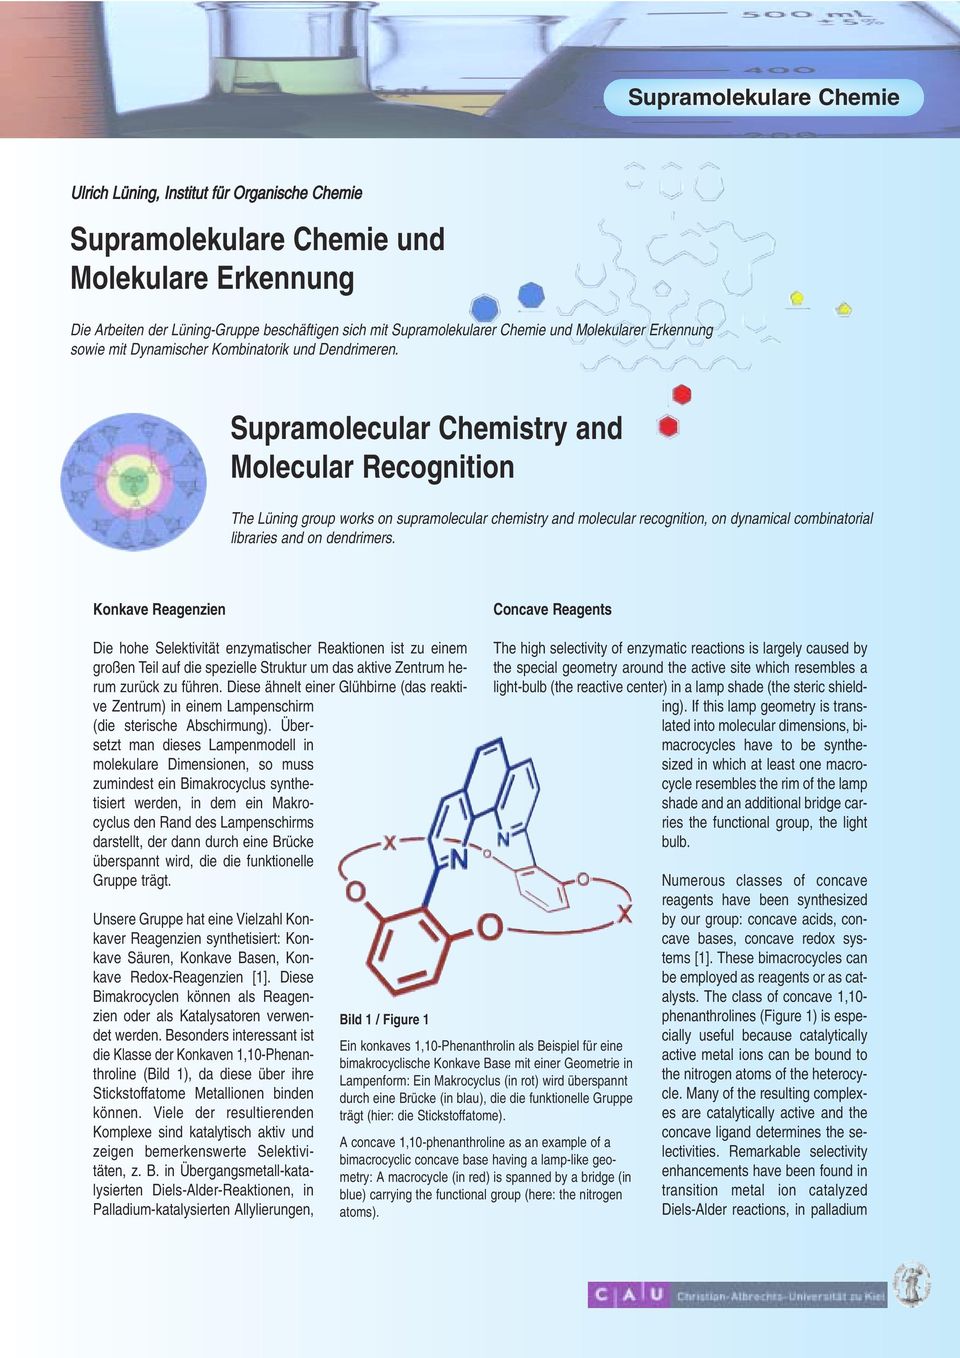 Supramolecular Chemistry and Molecular Recognition The Lüning group works on supramolecular chemistry and molecular recognition, on dynamical combinatorial libraries and on dendrimers.